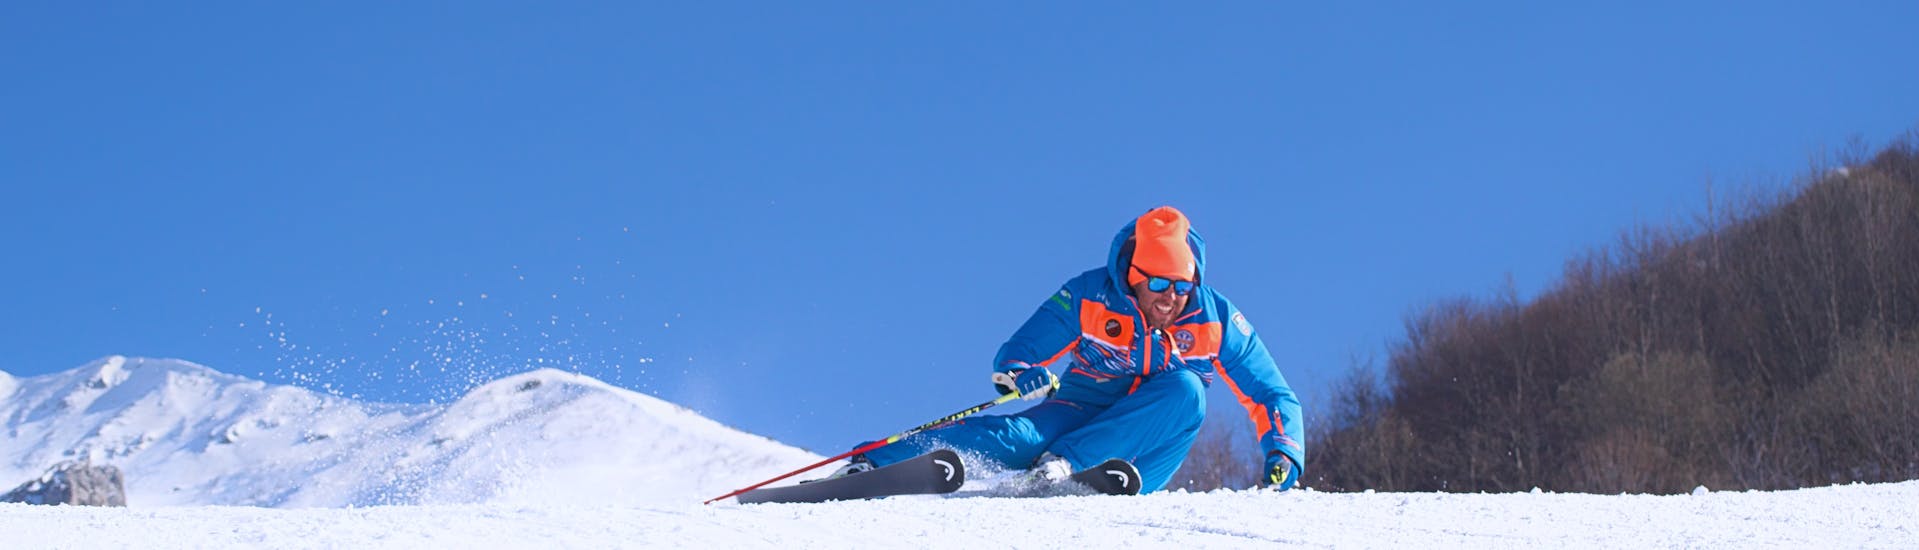 Ski instructor racing at full speed on the snow of Limone before one of the private Adults Ski Lessons for All Levels.